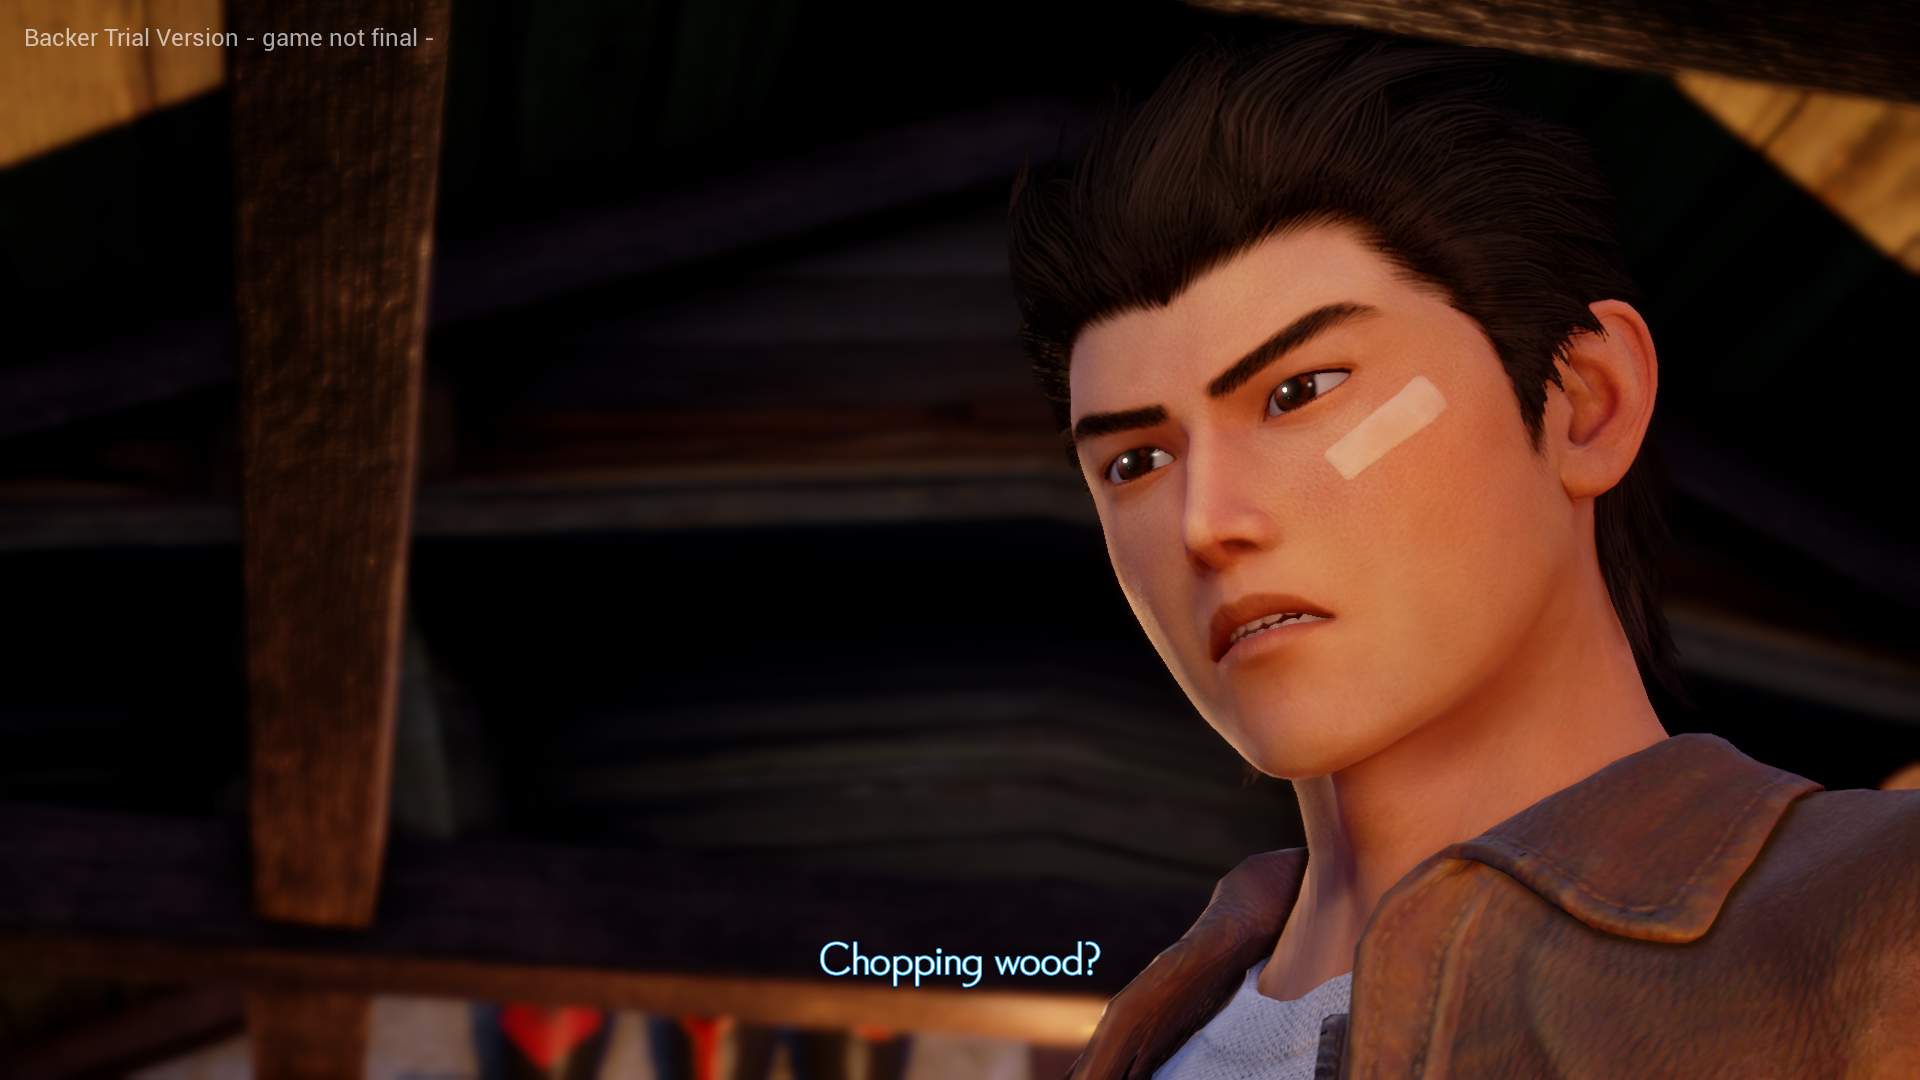 shenmue3-win64-shippiswk5c.png